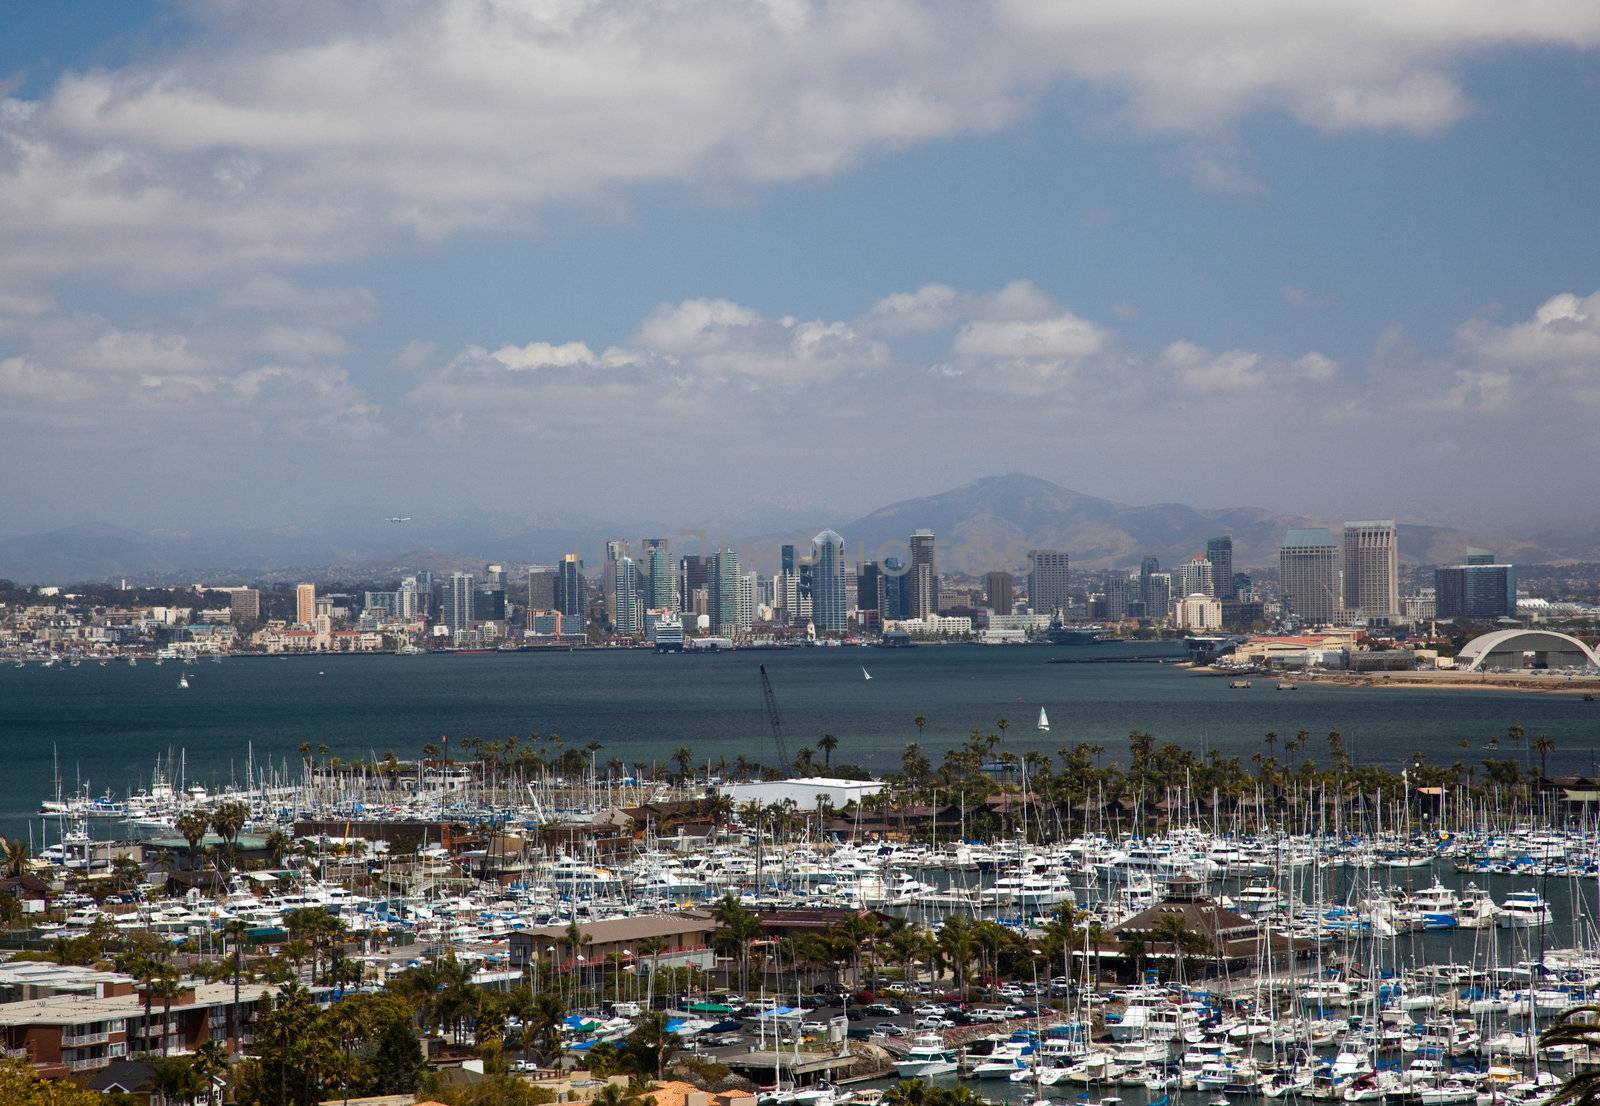 San Diego Skyline over yachts in harbor by steheap